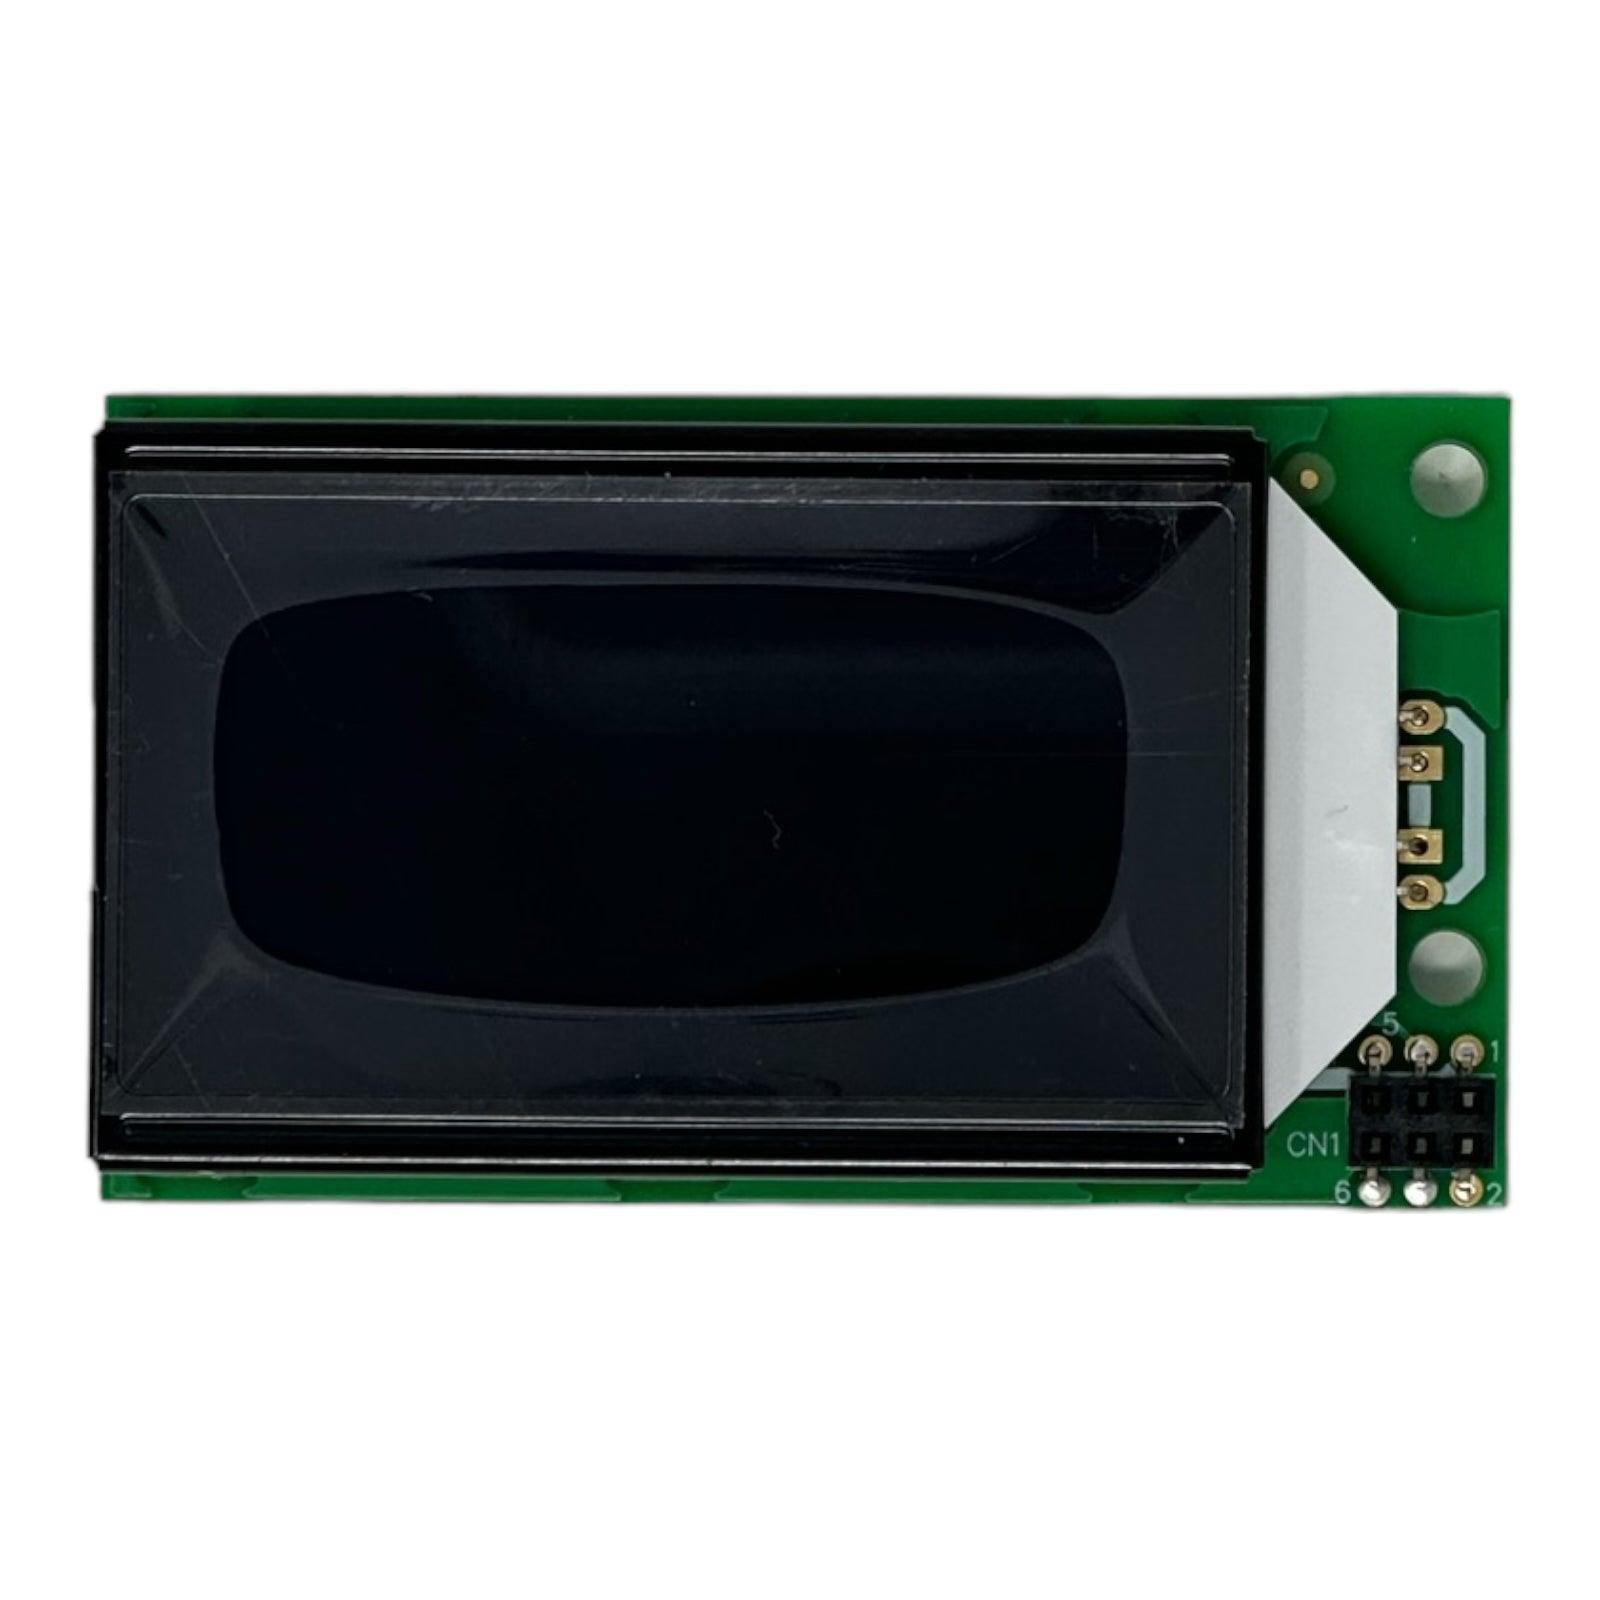 LCD Display Screen Only for Off-Grid Inverter Voltacon MPP Voltronic - VoltaconSolar